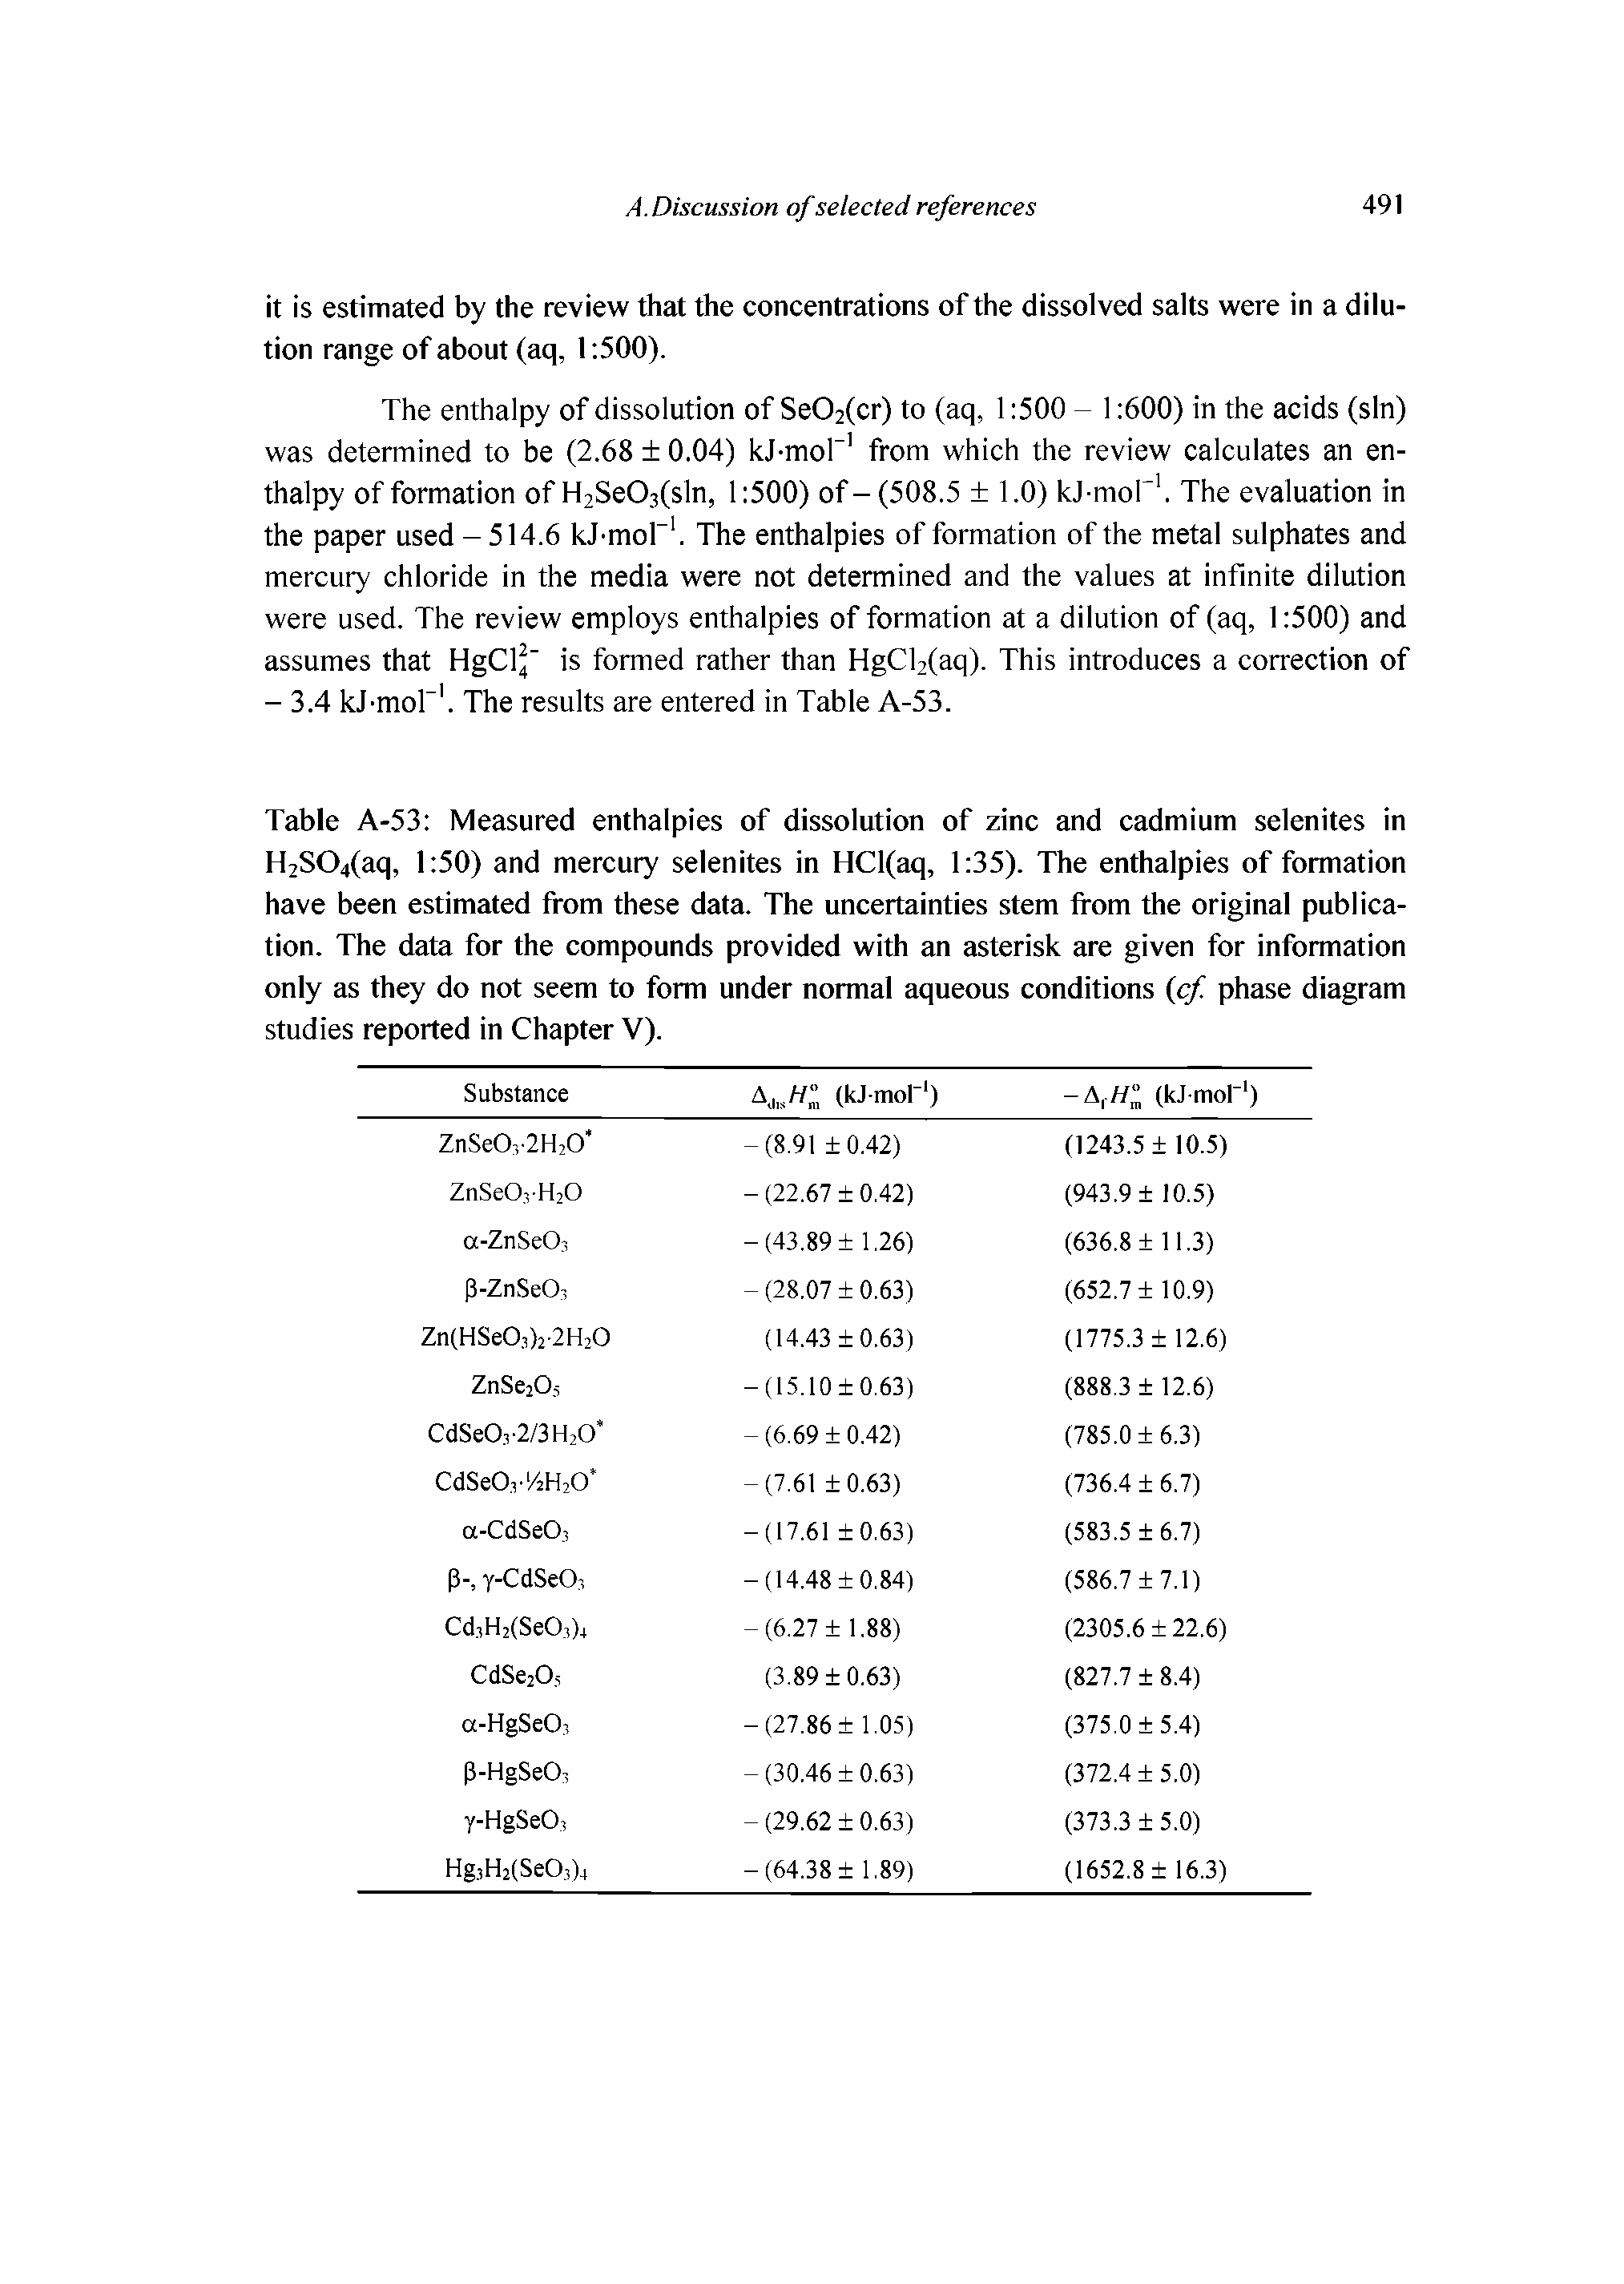 Table A-53 Measured enthalpies of dissolution of zinc and cadmium selenites in H2S04(aq, 1 50) and mercury selenites in HCl(aq, 1 35). The enthalpies of formation have been estimated from these data. The uncertainties stem from the original publication. The data for the compounds provided with an asterisk are given for information only as they do not seem to form under normal aqueous conditions cf. phase diagram studies reported in Chapter V).